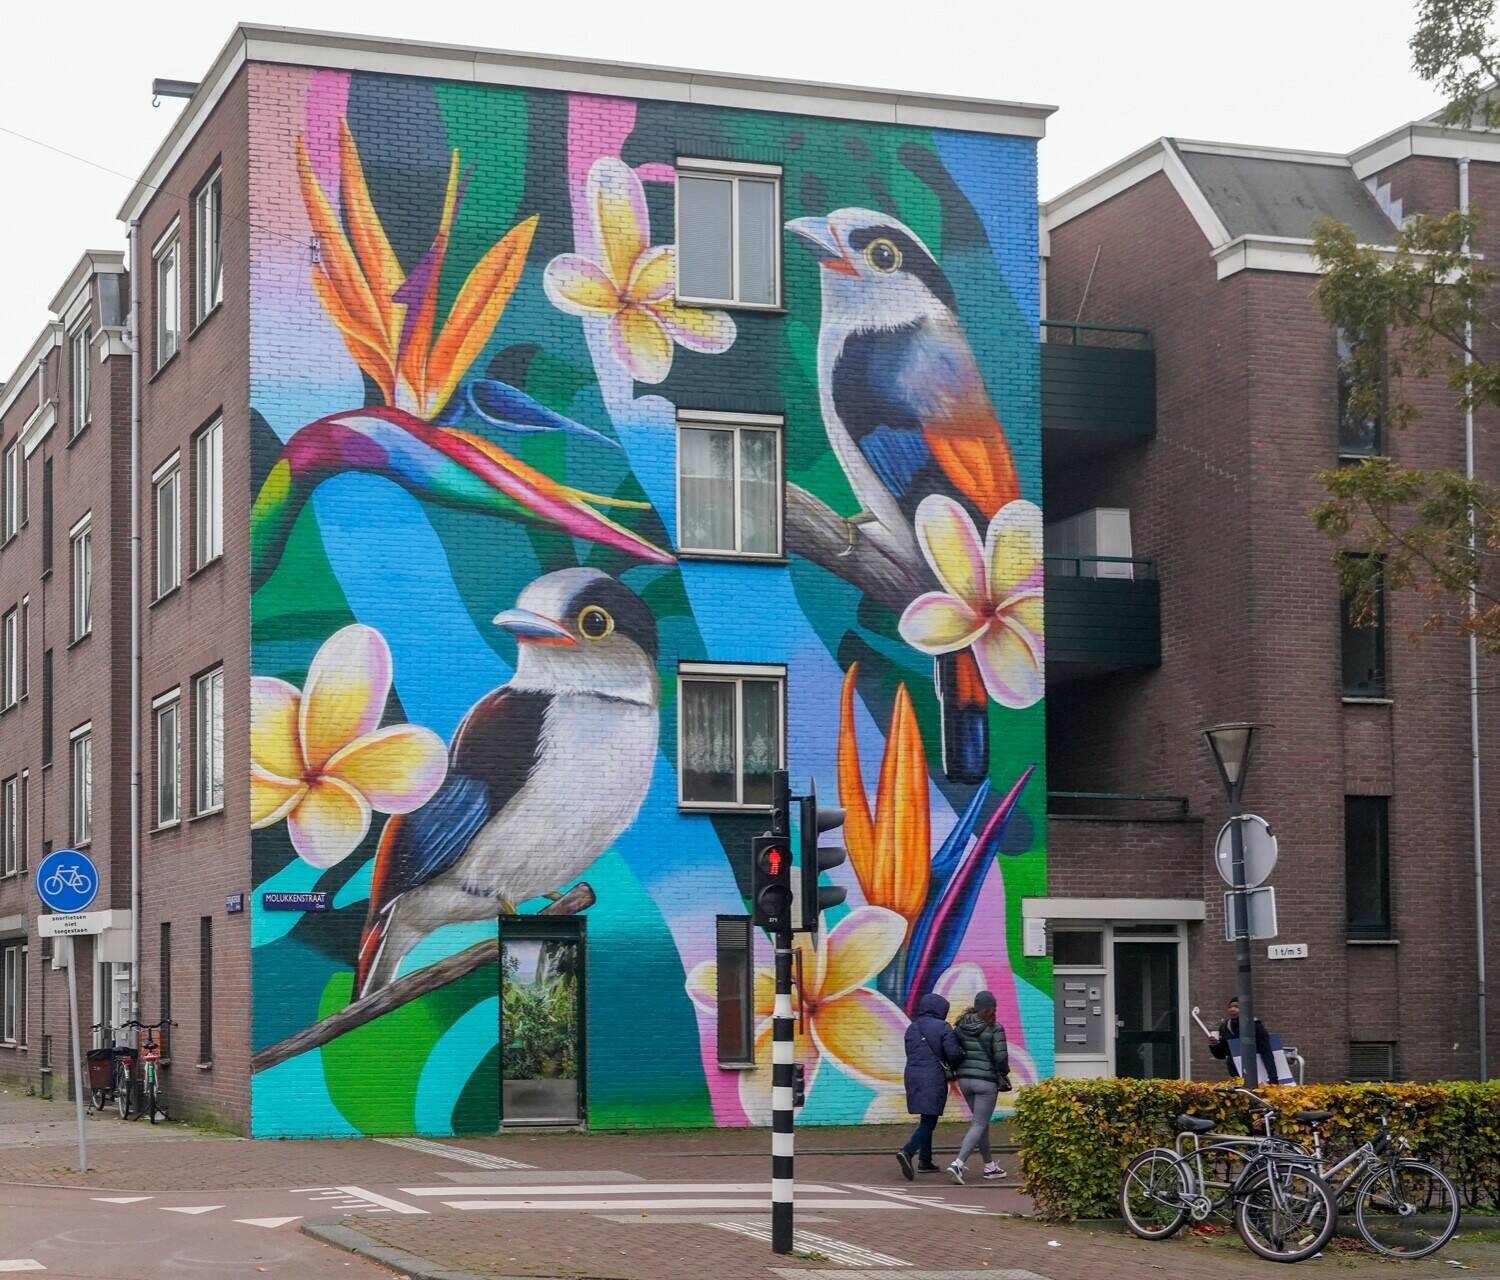 Amsterdam building with a mural with colorful tropical birds and plants.